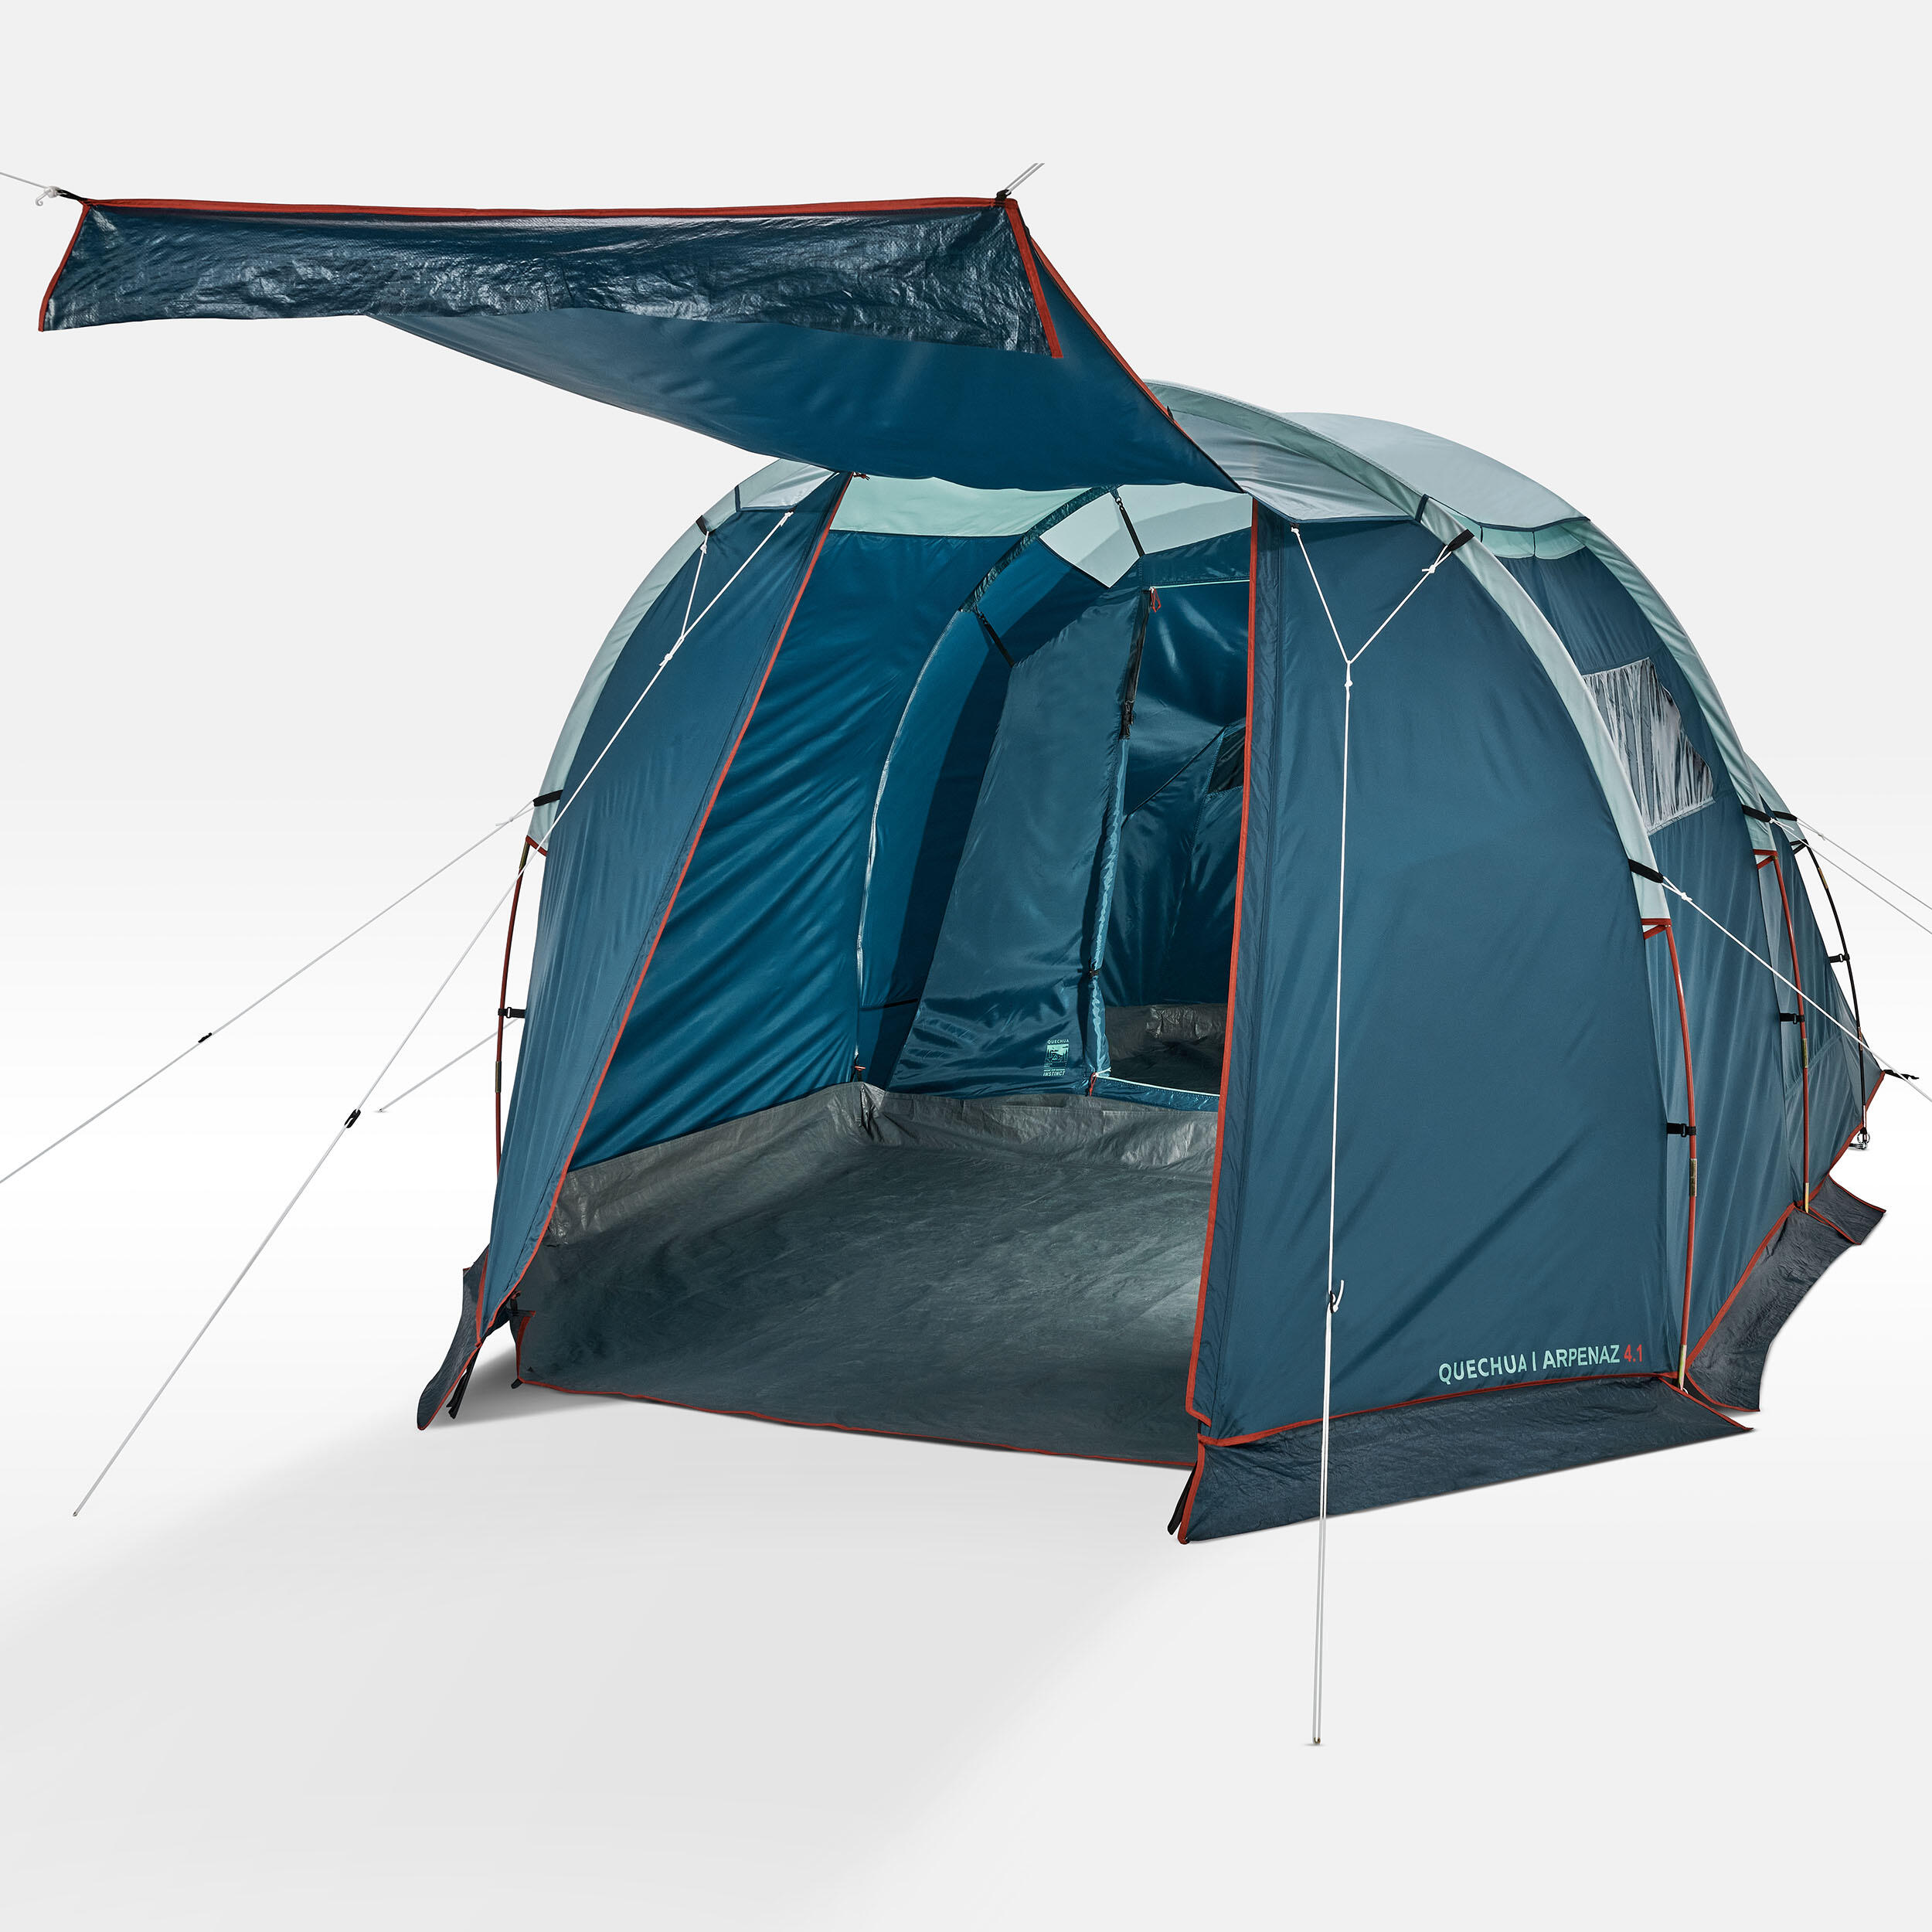 Camping tent with poles - Arpenaz 4.1 - 4 Person - 1 Bedroom 8/22